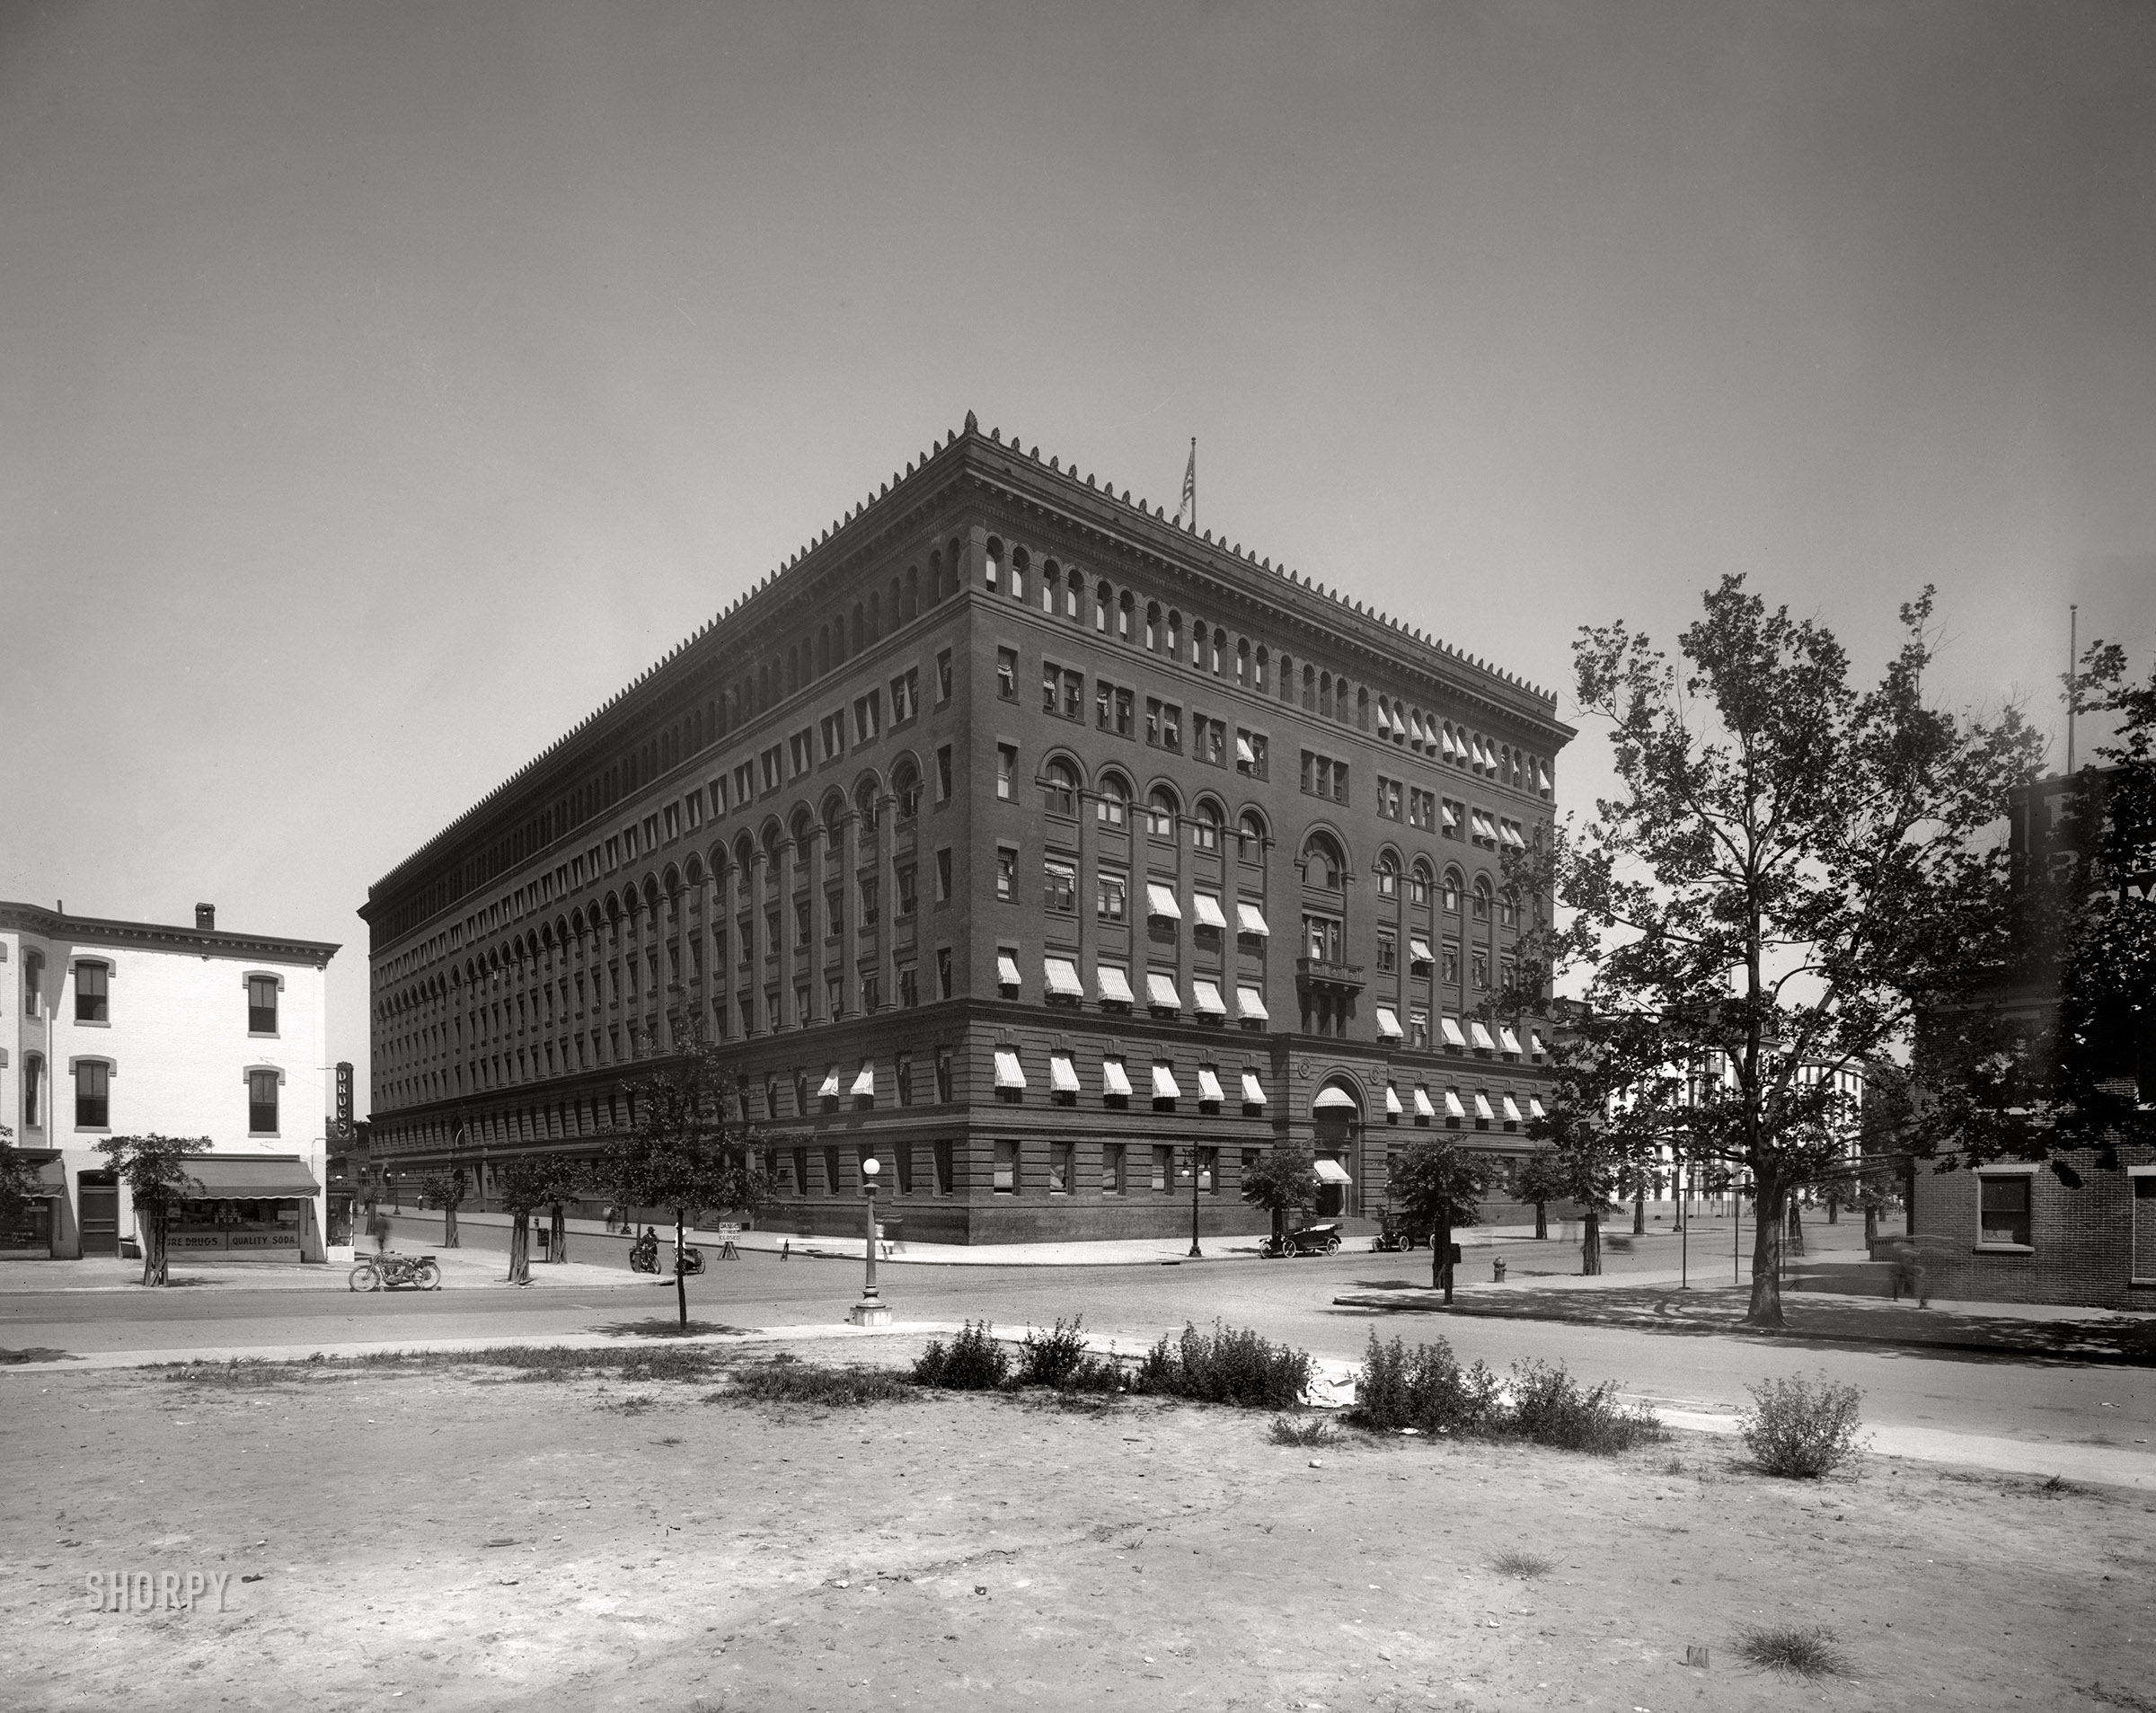 Washington, D.C., circa 1920. "Government Printing Office, H and North Capitol Streets N.W." Affectionately known as "The Swamp." National Photo Co. glass negative. View full size.